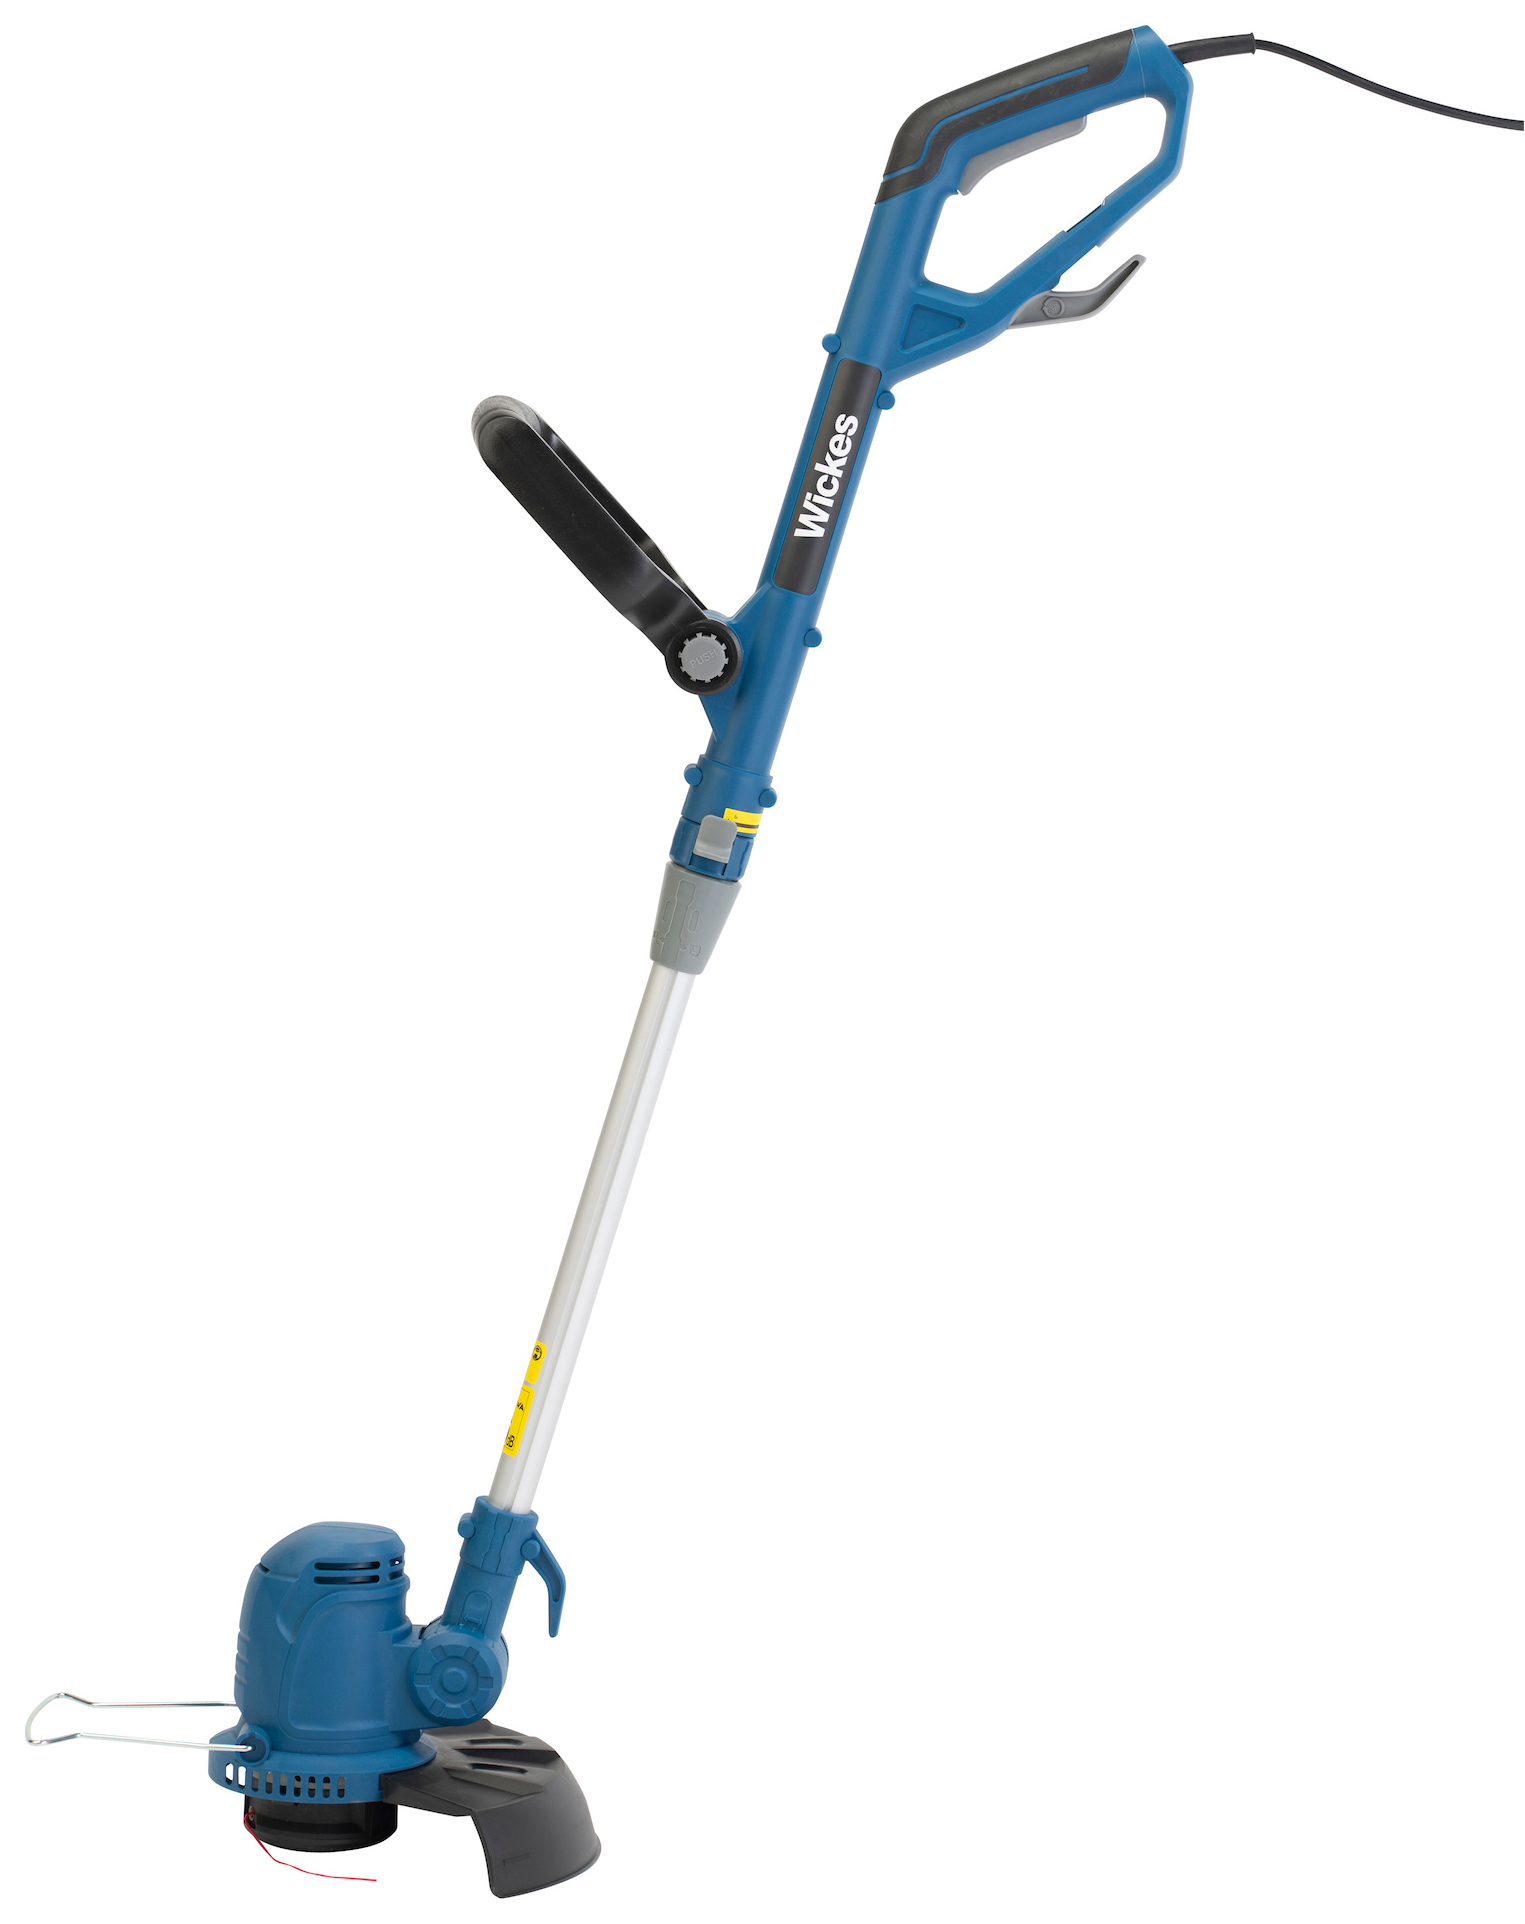 Wickes Corded 25cm Grass Trimmer